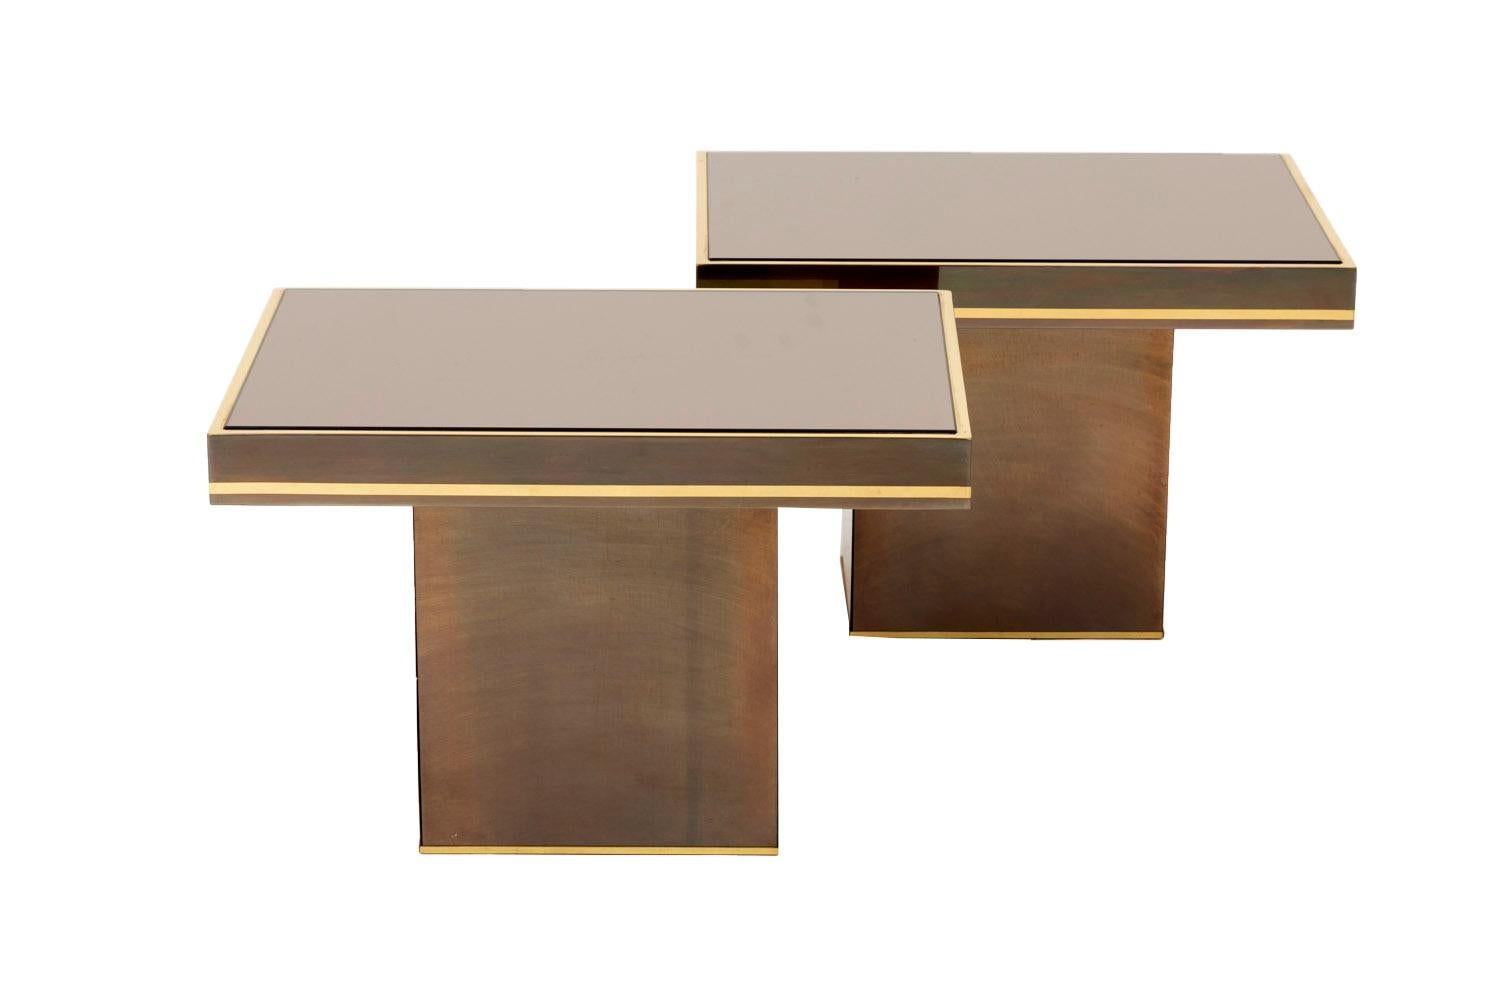 European Willy Rizzo, Pair of End Tables in Coppered Mirrors, 1980s